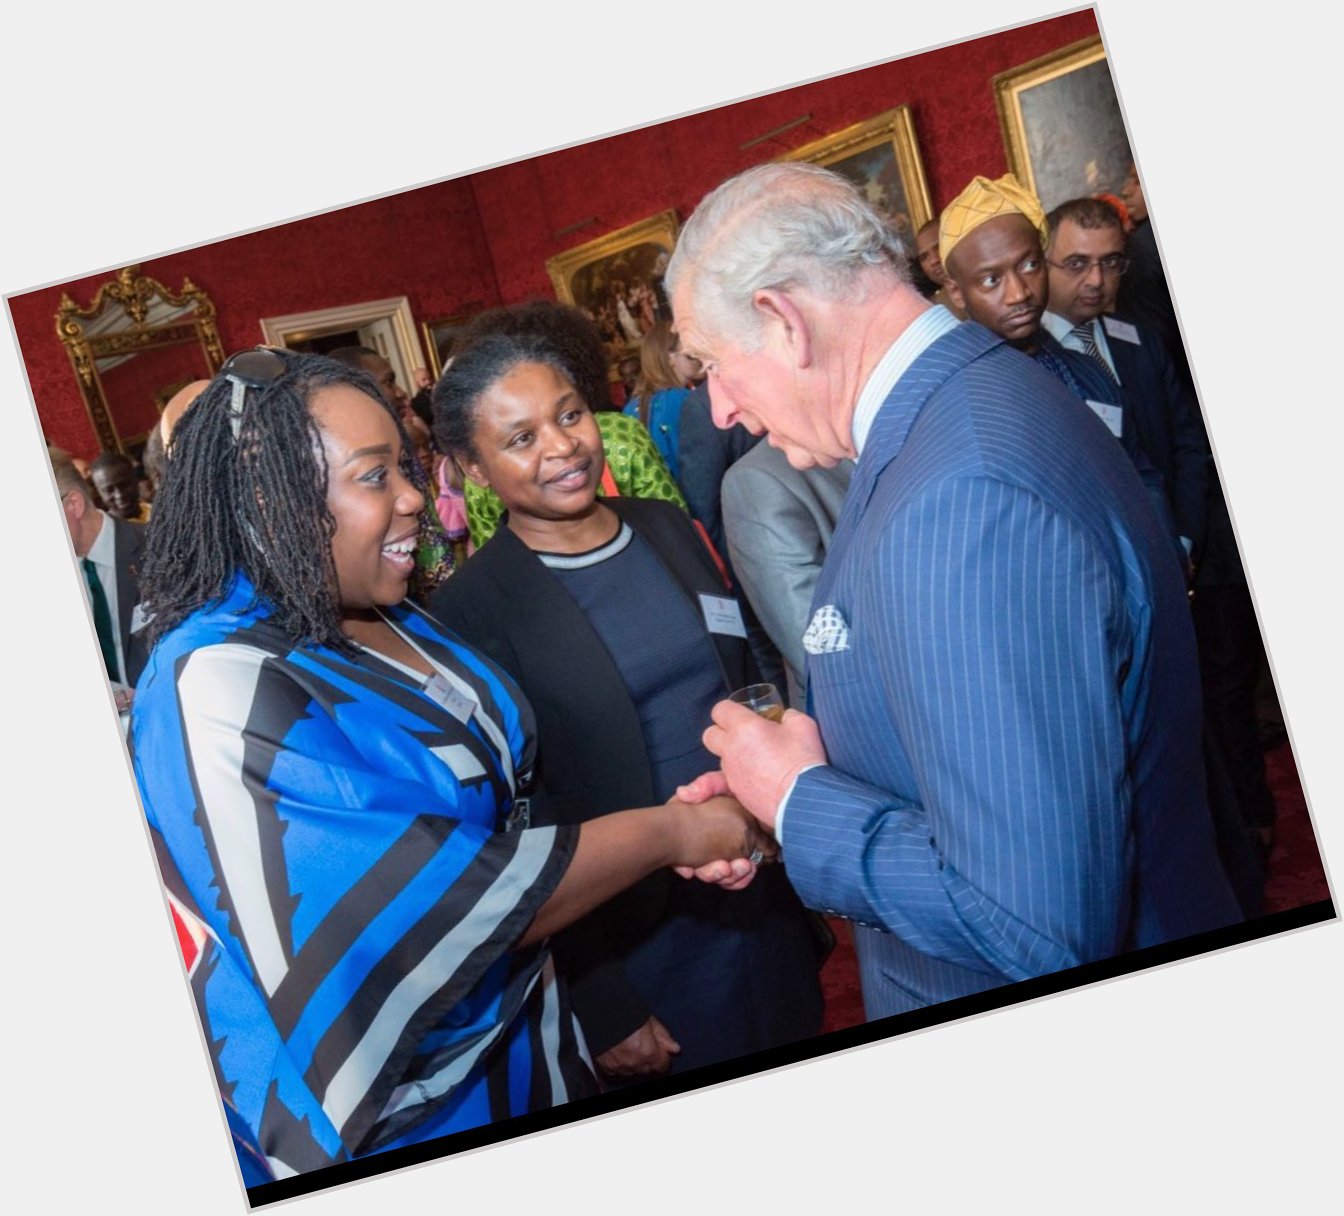 Jumping on the I met Prince Charles bandwagon....

I m sure he remembers this day vividly. Happy Birthday  